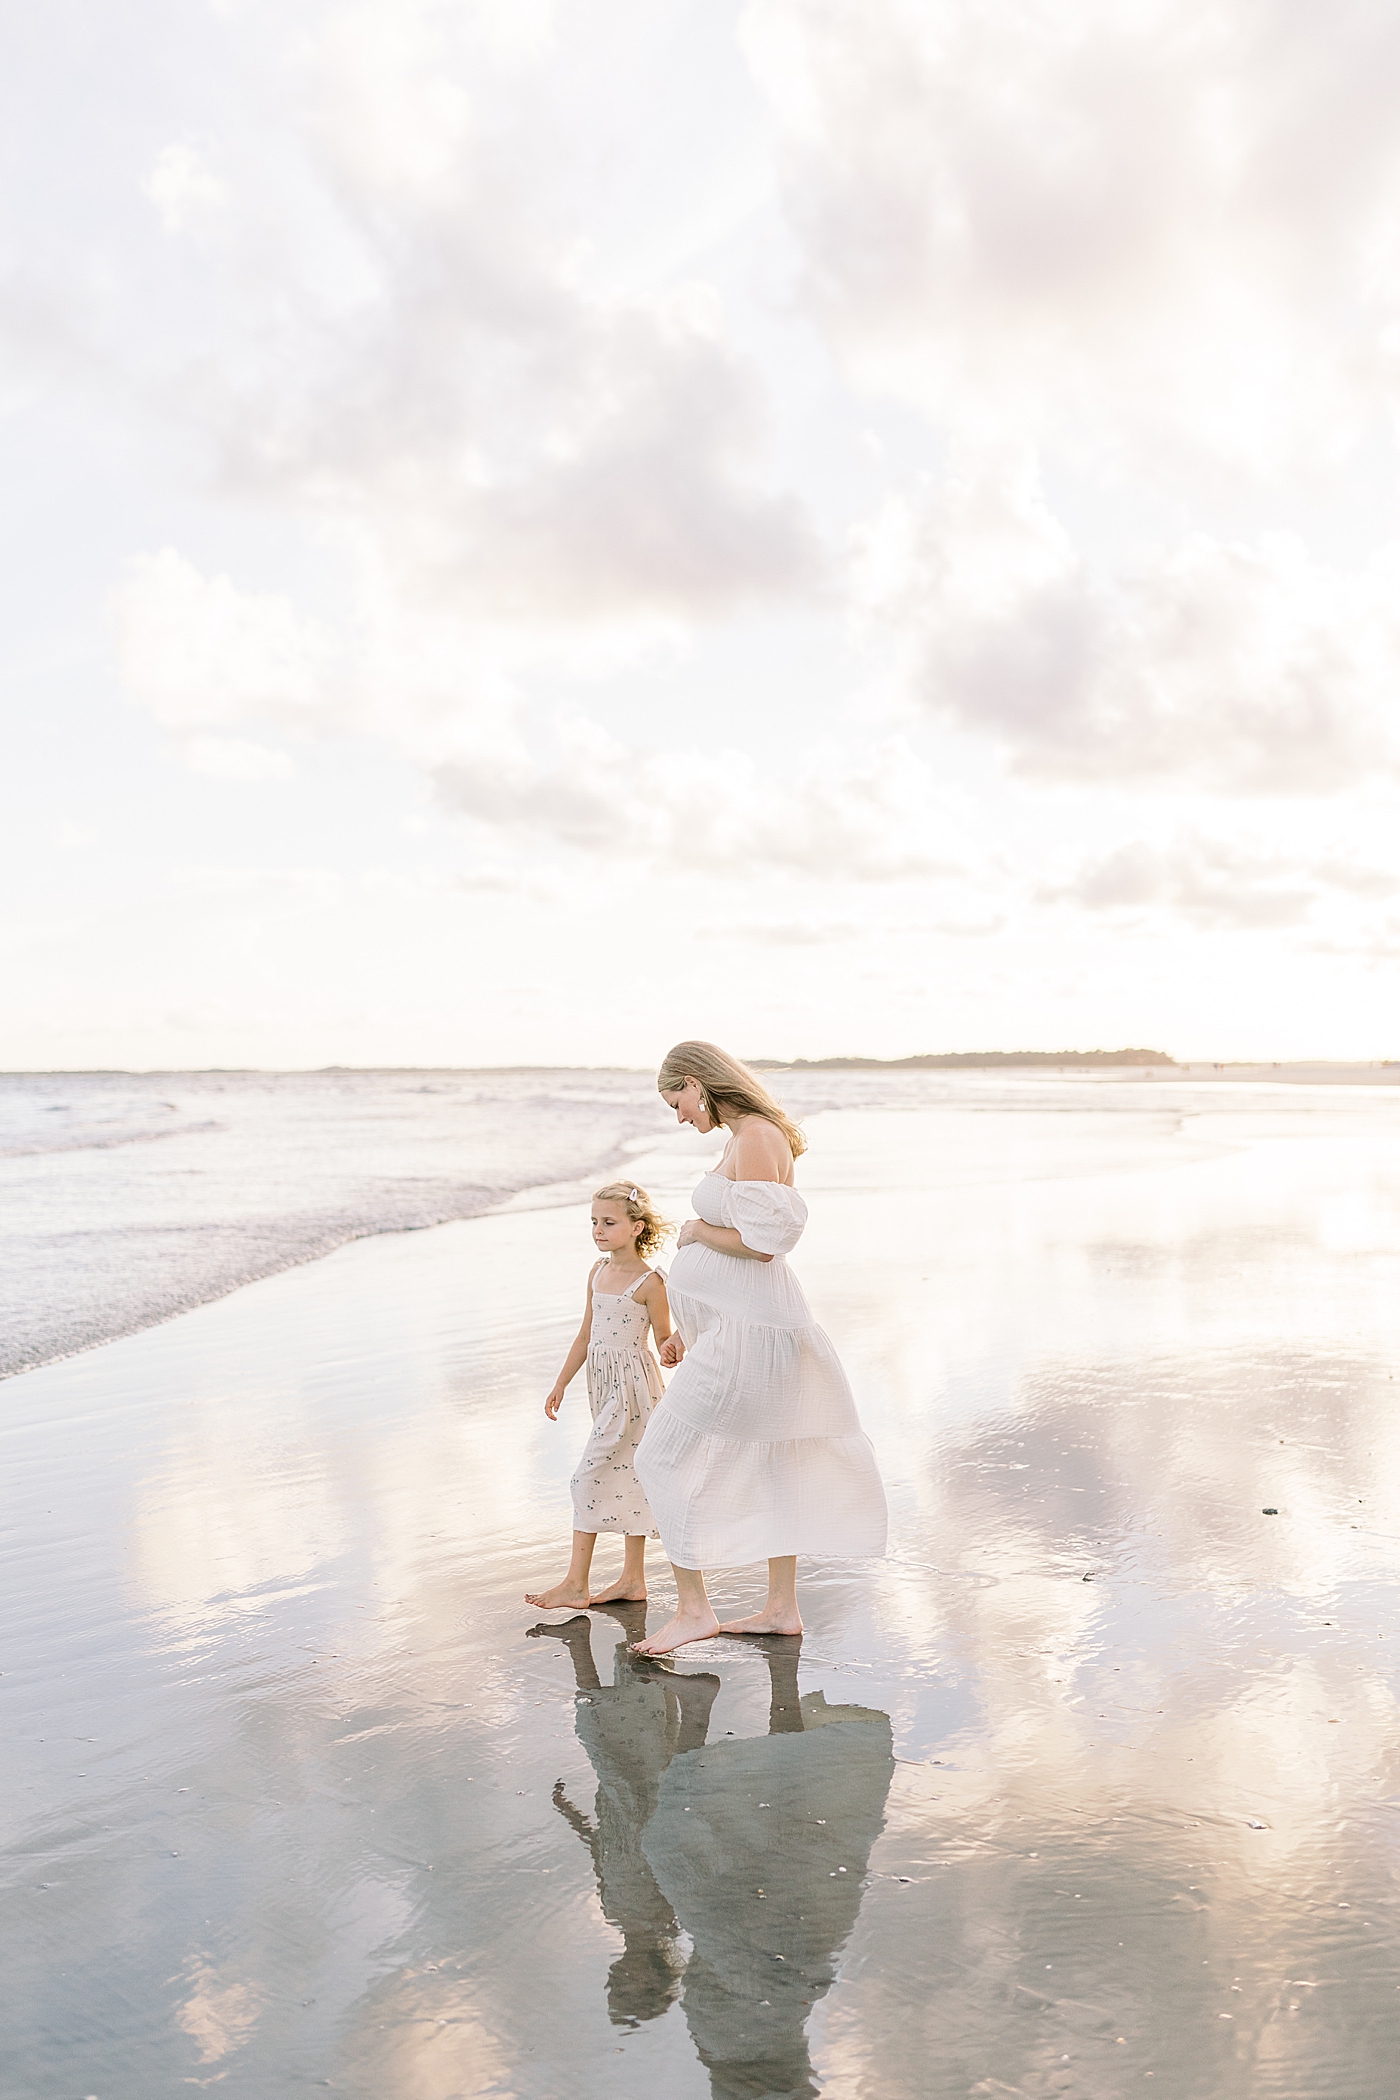 Mom and daughter holding hands walking on the beach | Image by Caitlyn Motycka